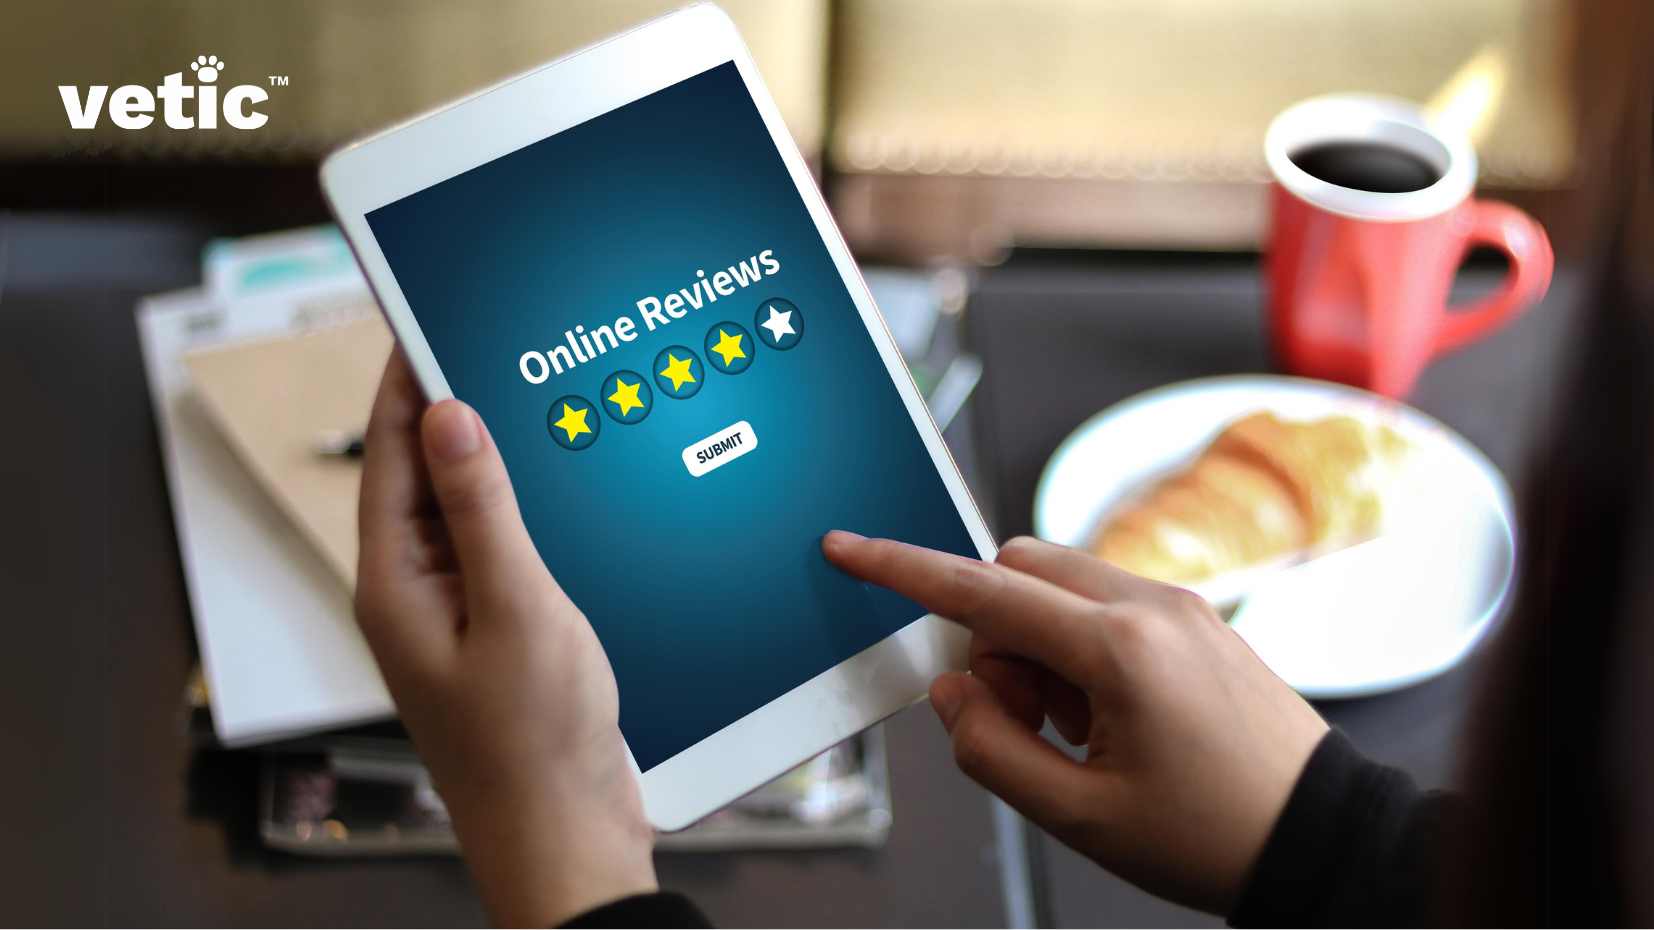 The image depicts a person holding a tablet displaying an online review page with a five-star rating system. A red coffee mug and a plate with a croissant are also visible in the background. The central focus is on a person holding a white tablet, which displays an “Online Reviews” page. You should check the online review of each groomer to find the best dog groomer near you. On the tablet screen, there are five yellow stars indicating the rating system and a “submit” button. The person’s hand is visible, pointing at the tablet screen. In the background, there is a red coffee mug filled with coffee placed on dark surface. Next to the coffee mug, there’s also a white plate with what appears to be a croissant on it. There are some papers and folders under the tablet suggesting an office or work environment.